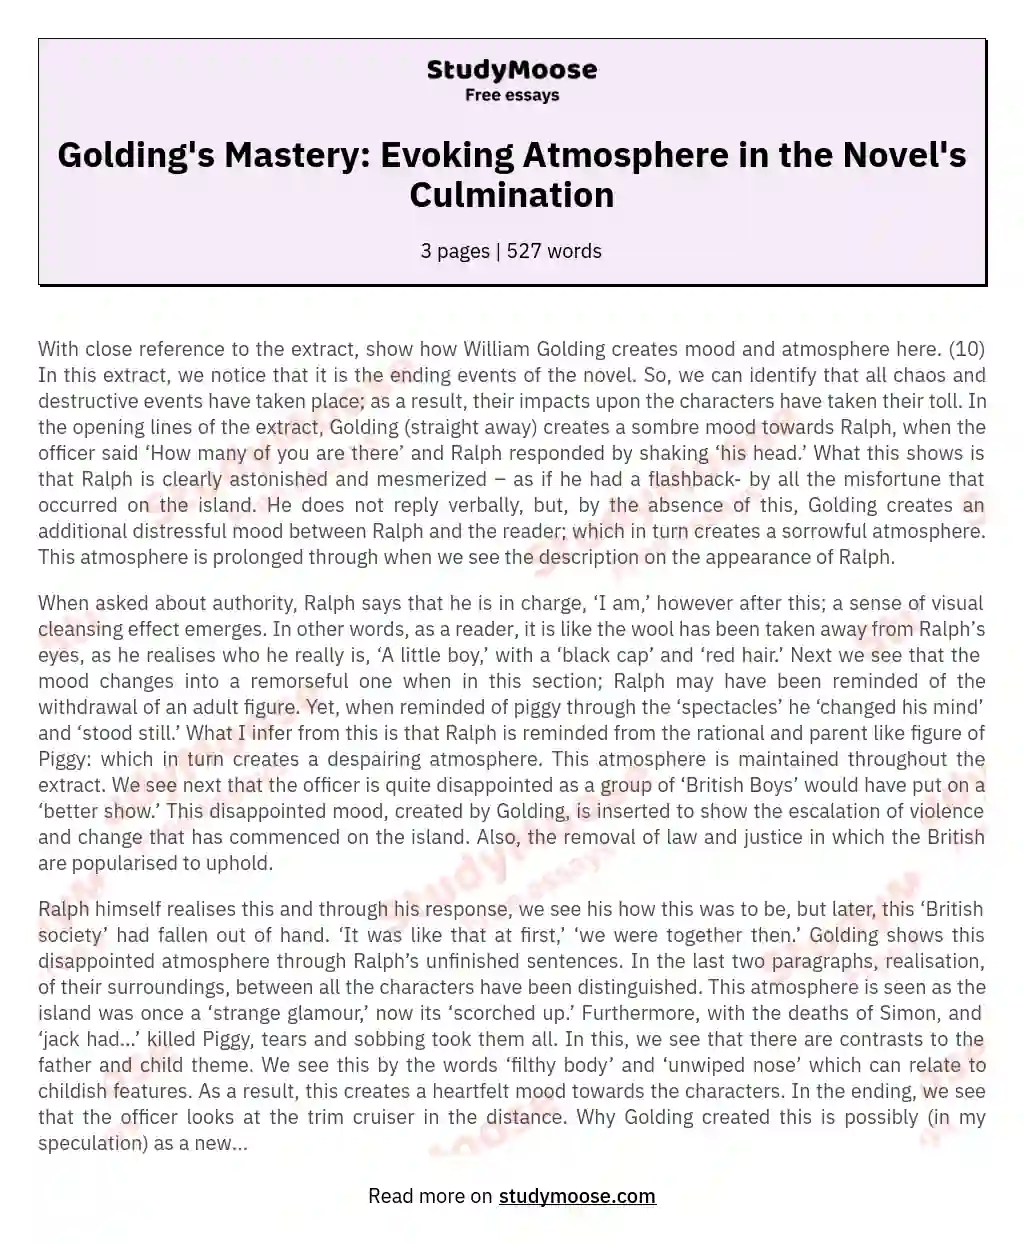 Golding's Mastery: Evoking Atmosphere in the Novel's Culmination essay